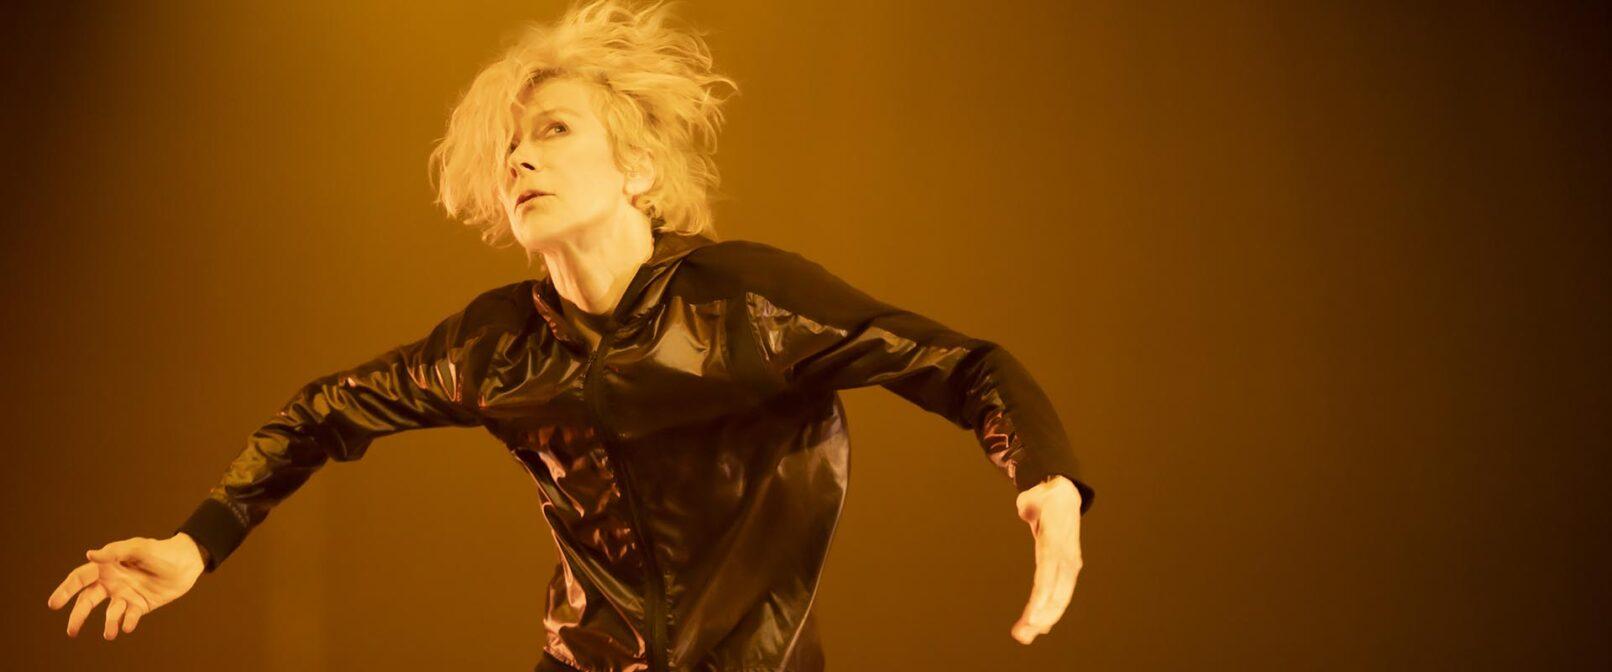 A woman with shaggy blond hair and a shiny black jacket faces the camera with her arms outstretched to her sides.